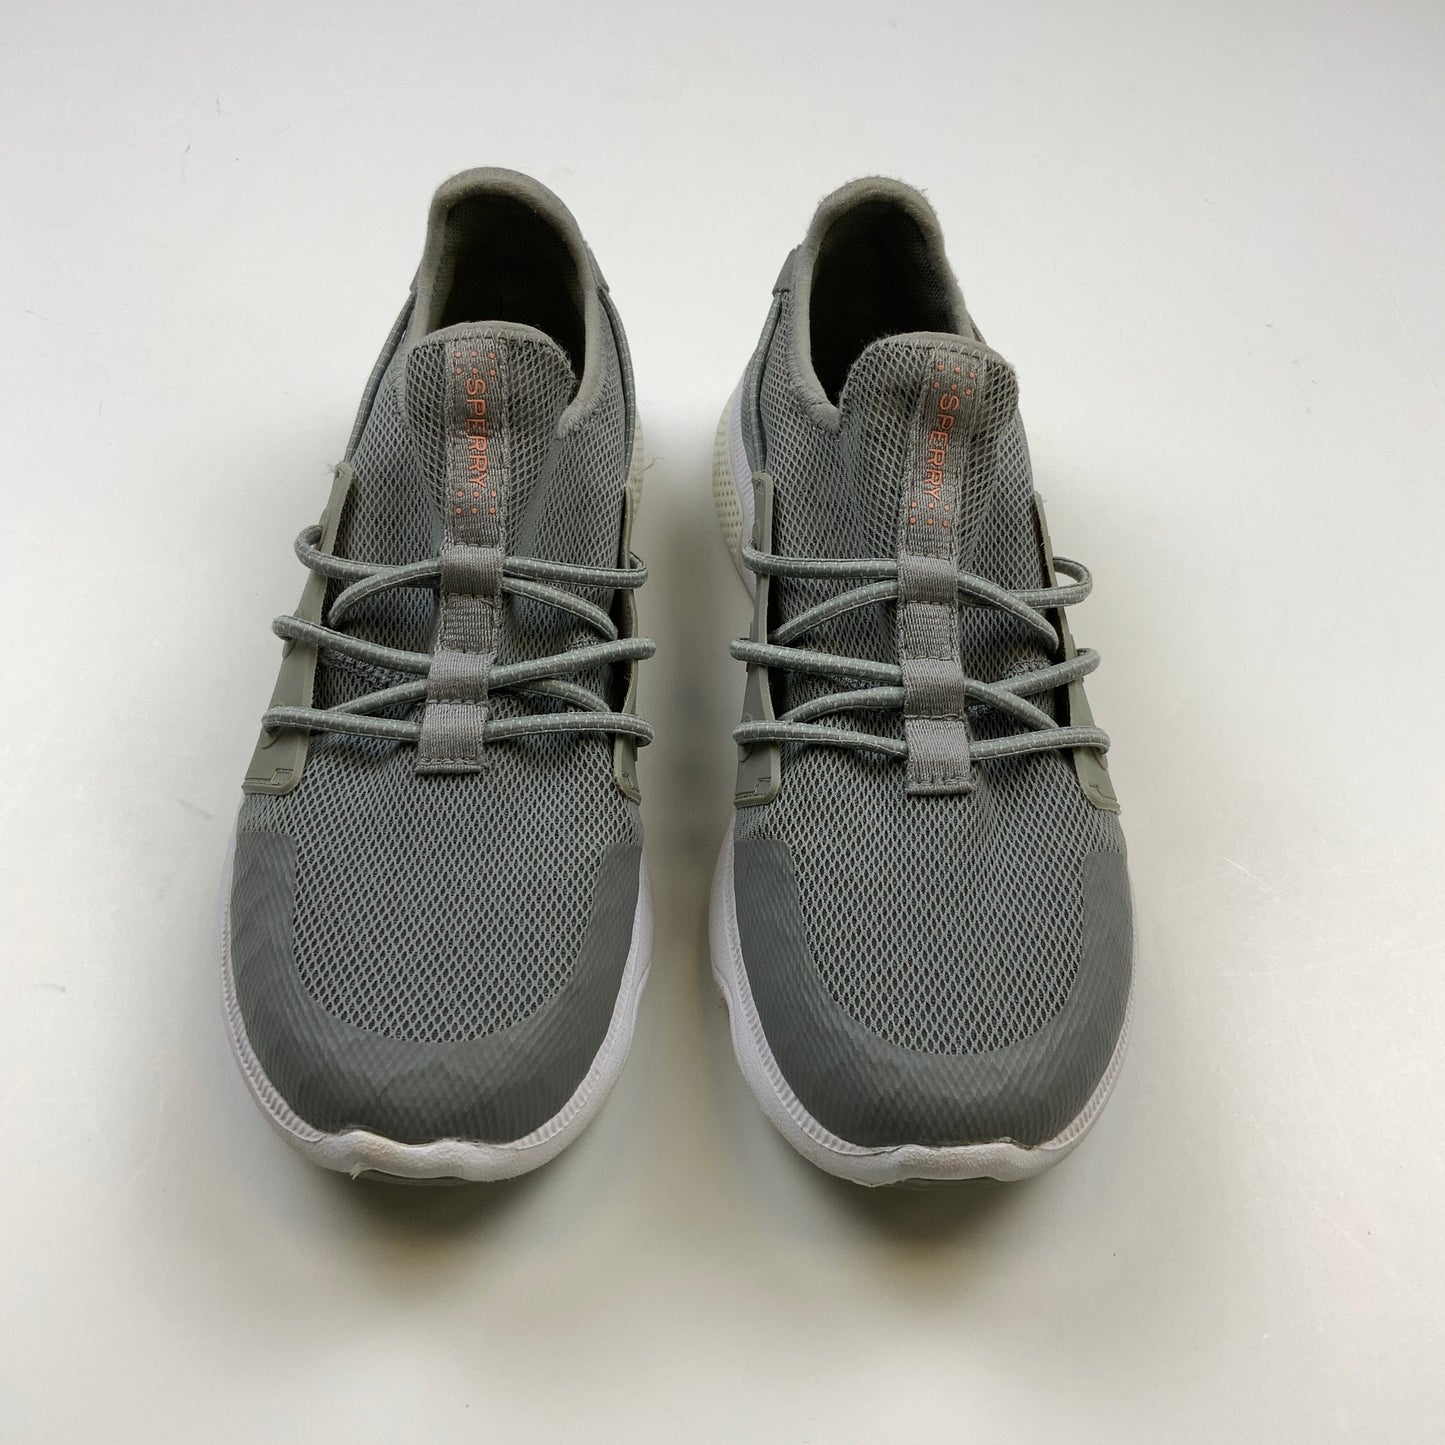 Grey Shoes Athletic Sperry, Size 9.5